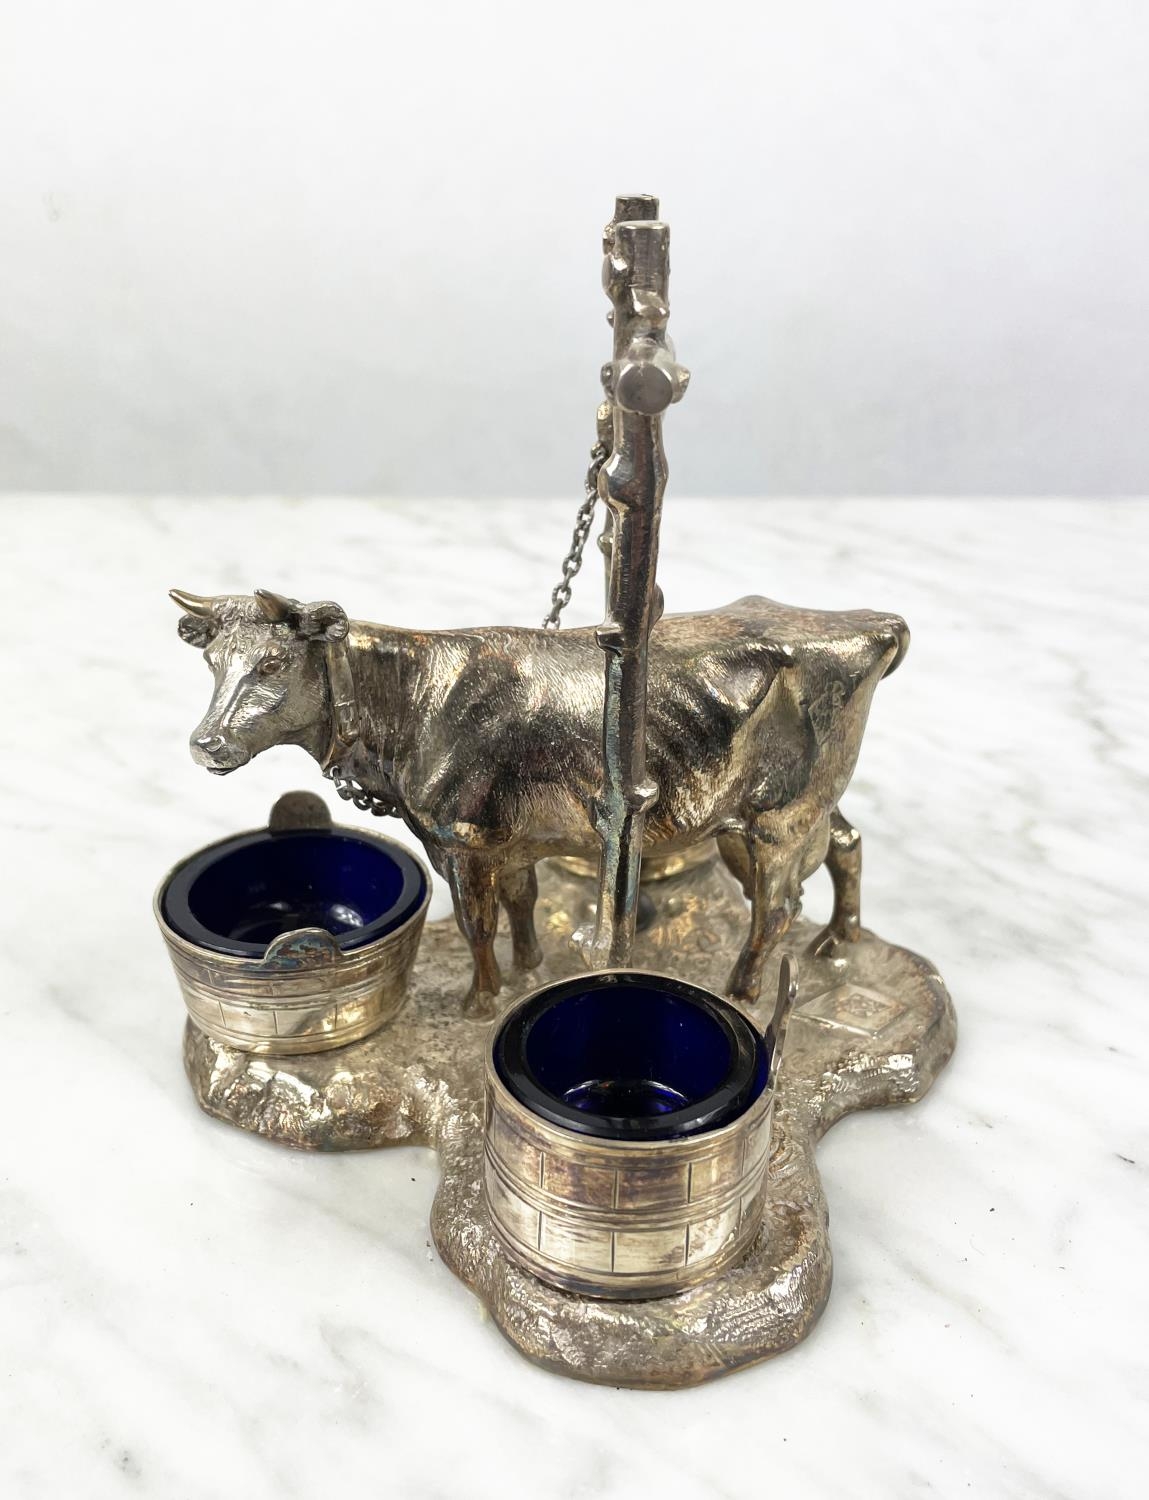 CRUET STAND, Victorian silver plated, having a tethered dairy cow with three pails with glass liners - Image 10 of 10